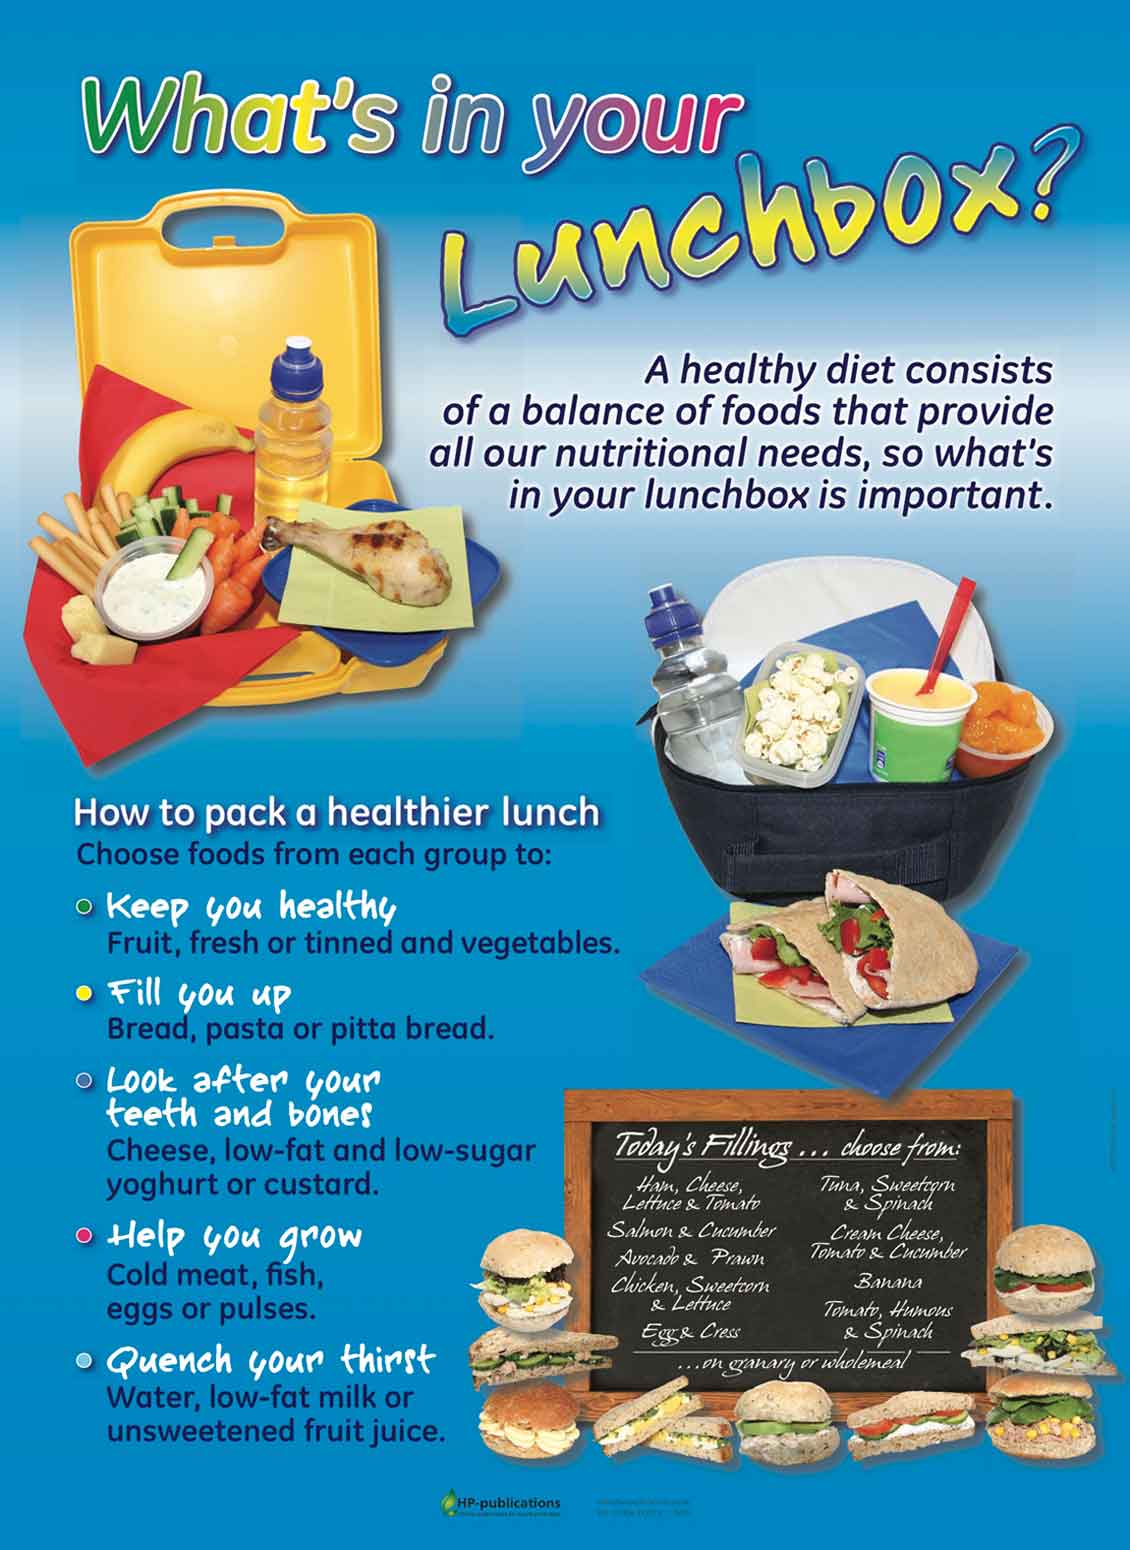 What's in your lunchbox?